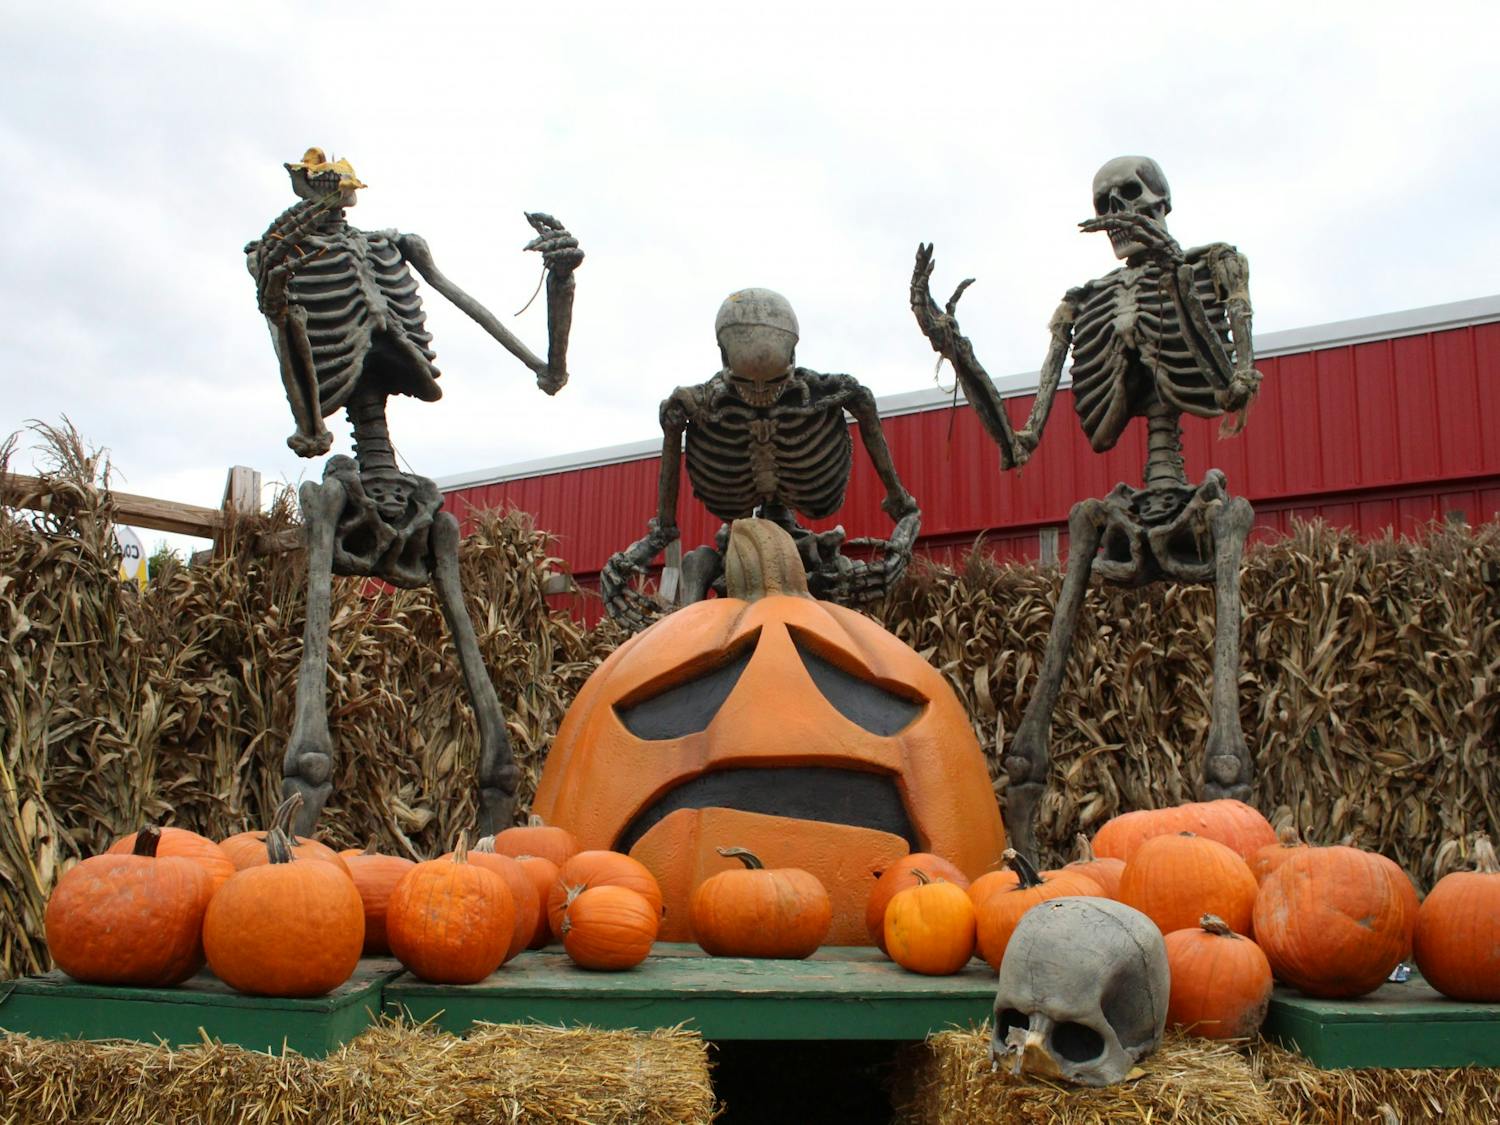 The Great Pumpkin Farm hosts a fall festival every weekend this month with events like pie-eating contests and pumpkin olympics.&nbsp;